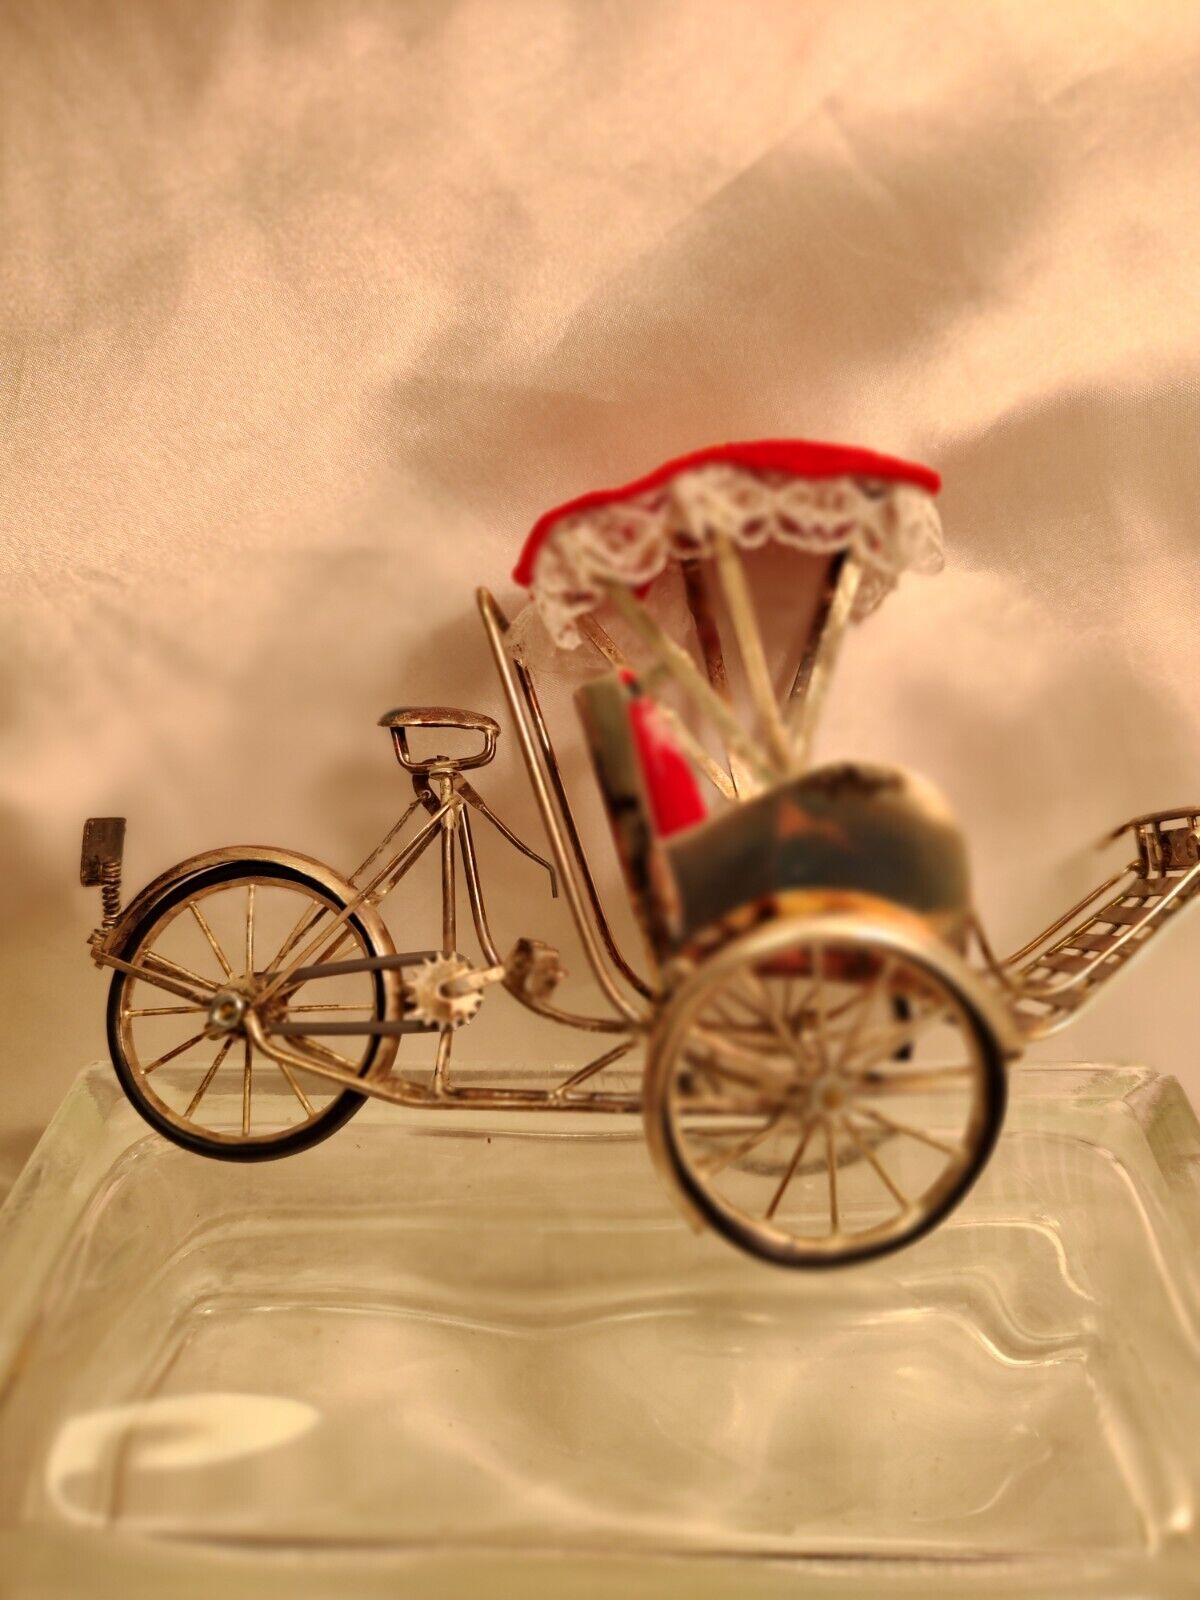 999 fine silver Rickshaw/carriage bicycle made in Vietnam excellent condition